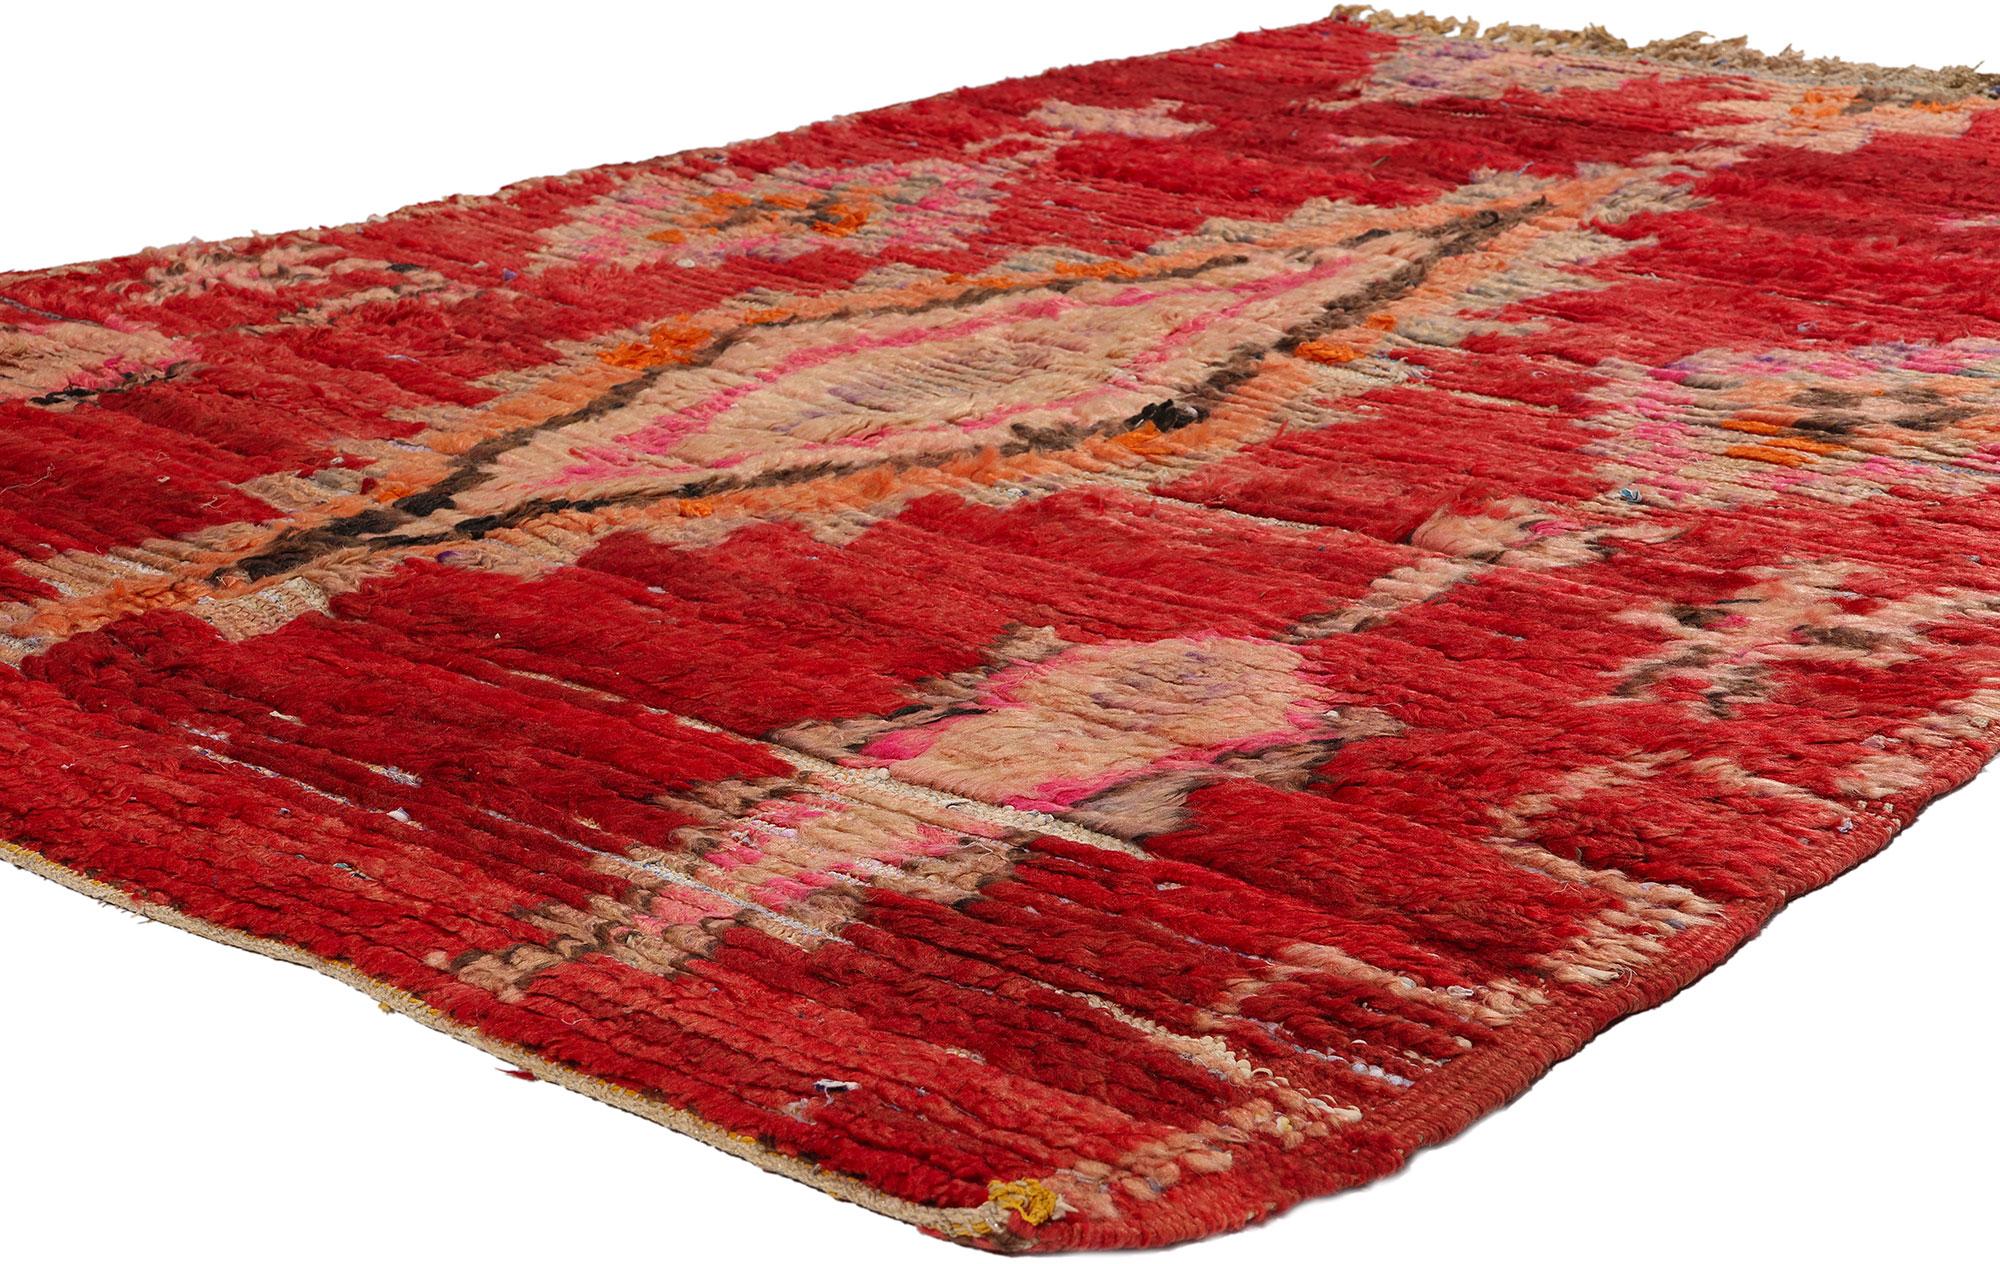 21831 Vintage Red Boucherouite Boujad Moroccan Rag Rug, 05'02 x 06'07. Embrace the lively essence of Boujad Boucherouite rugs, originating from the dynamic city of Boujad in the Khouribga region. These Moroccan rugs are celebrated for their